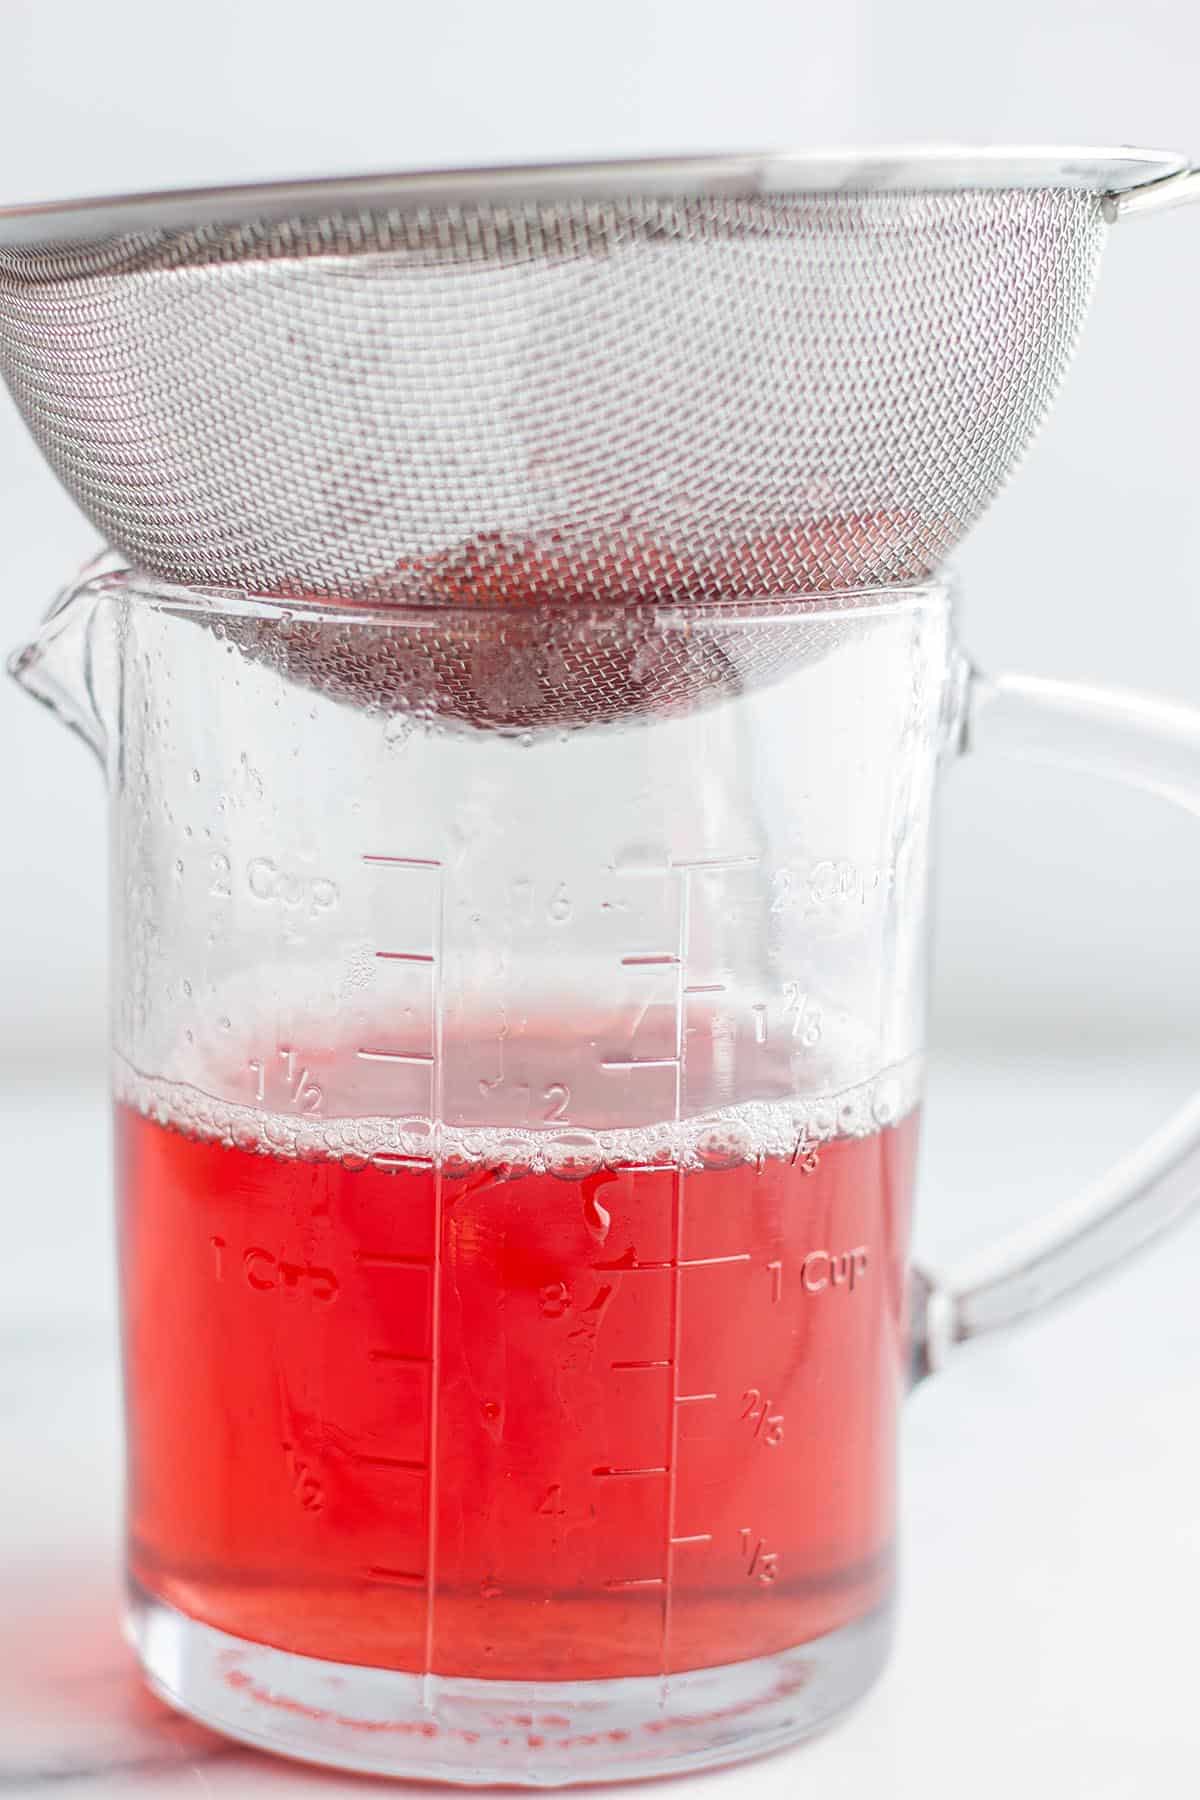 A liquid measuring cup with a pink liquid inside and a fine mesh strainer sitting on top.